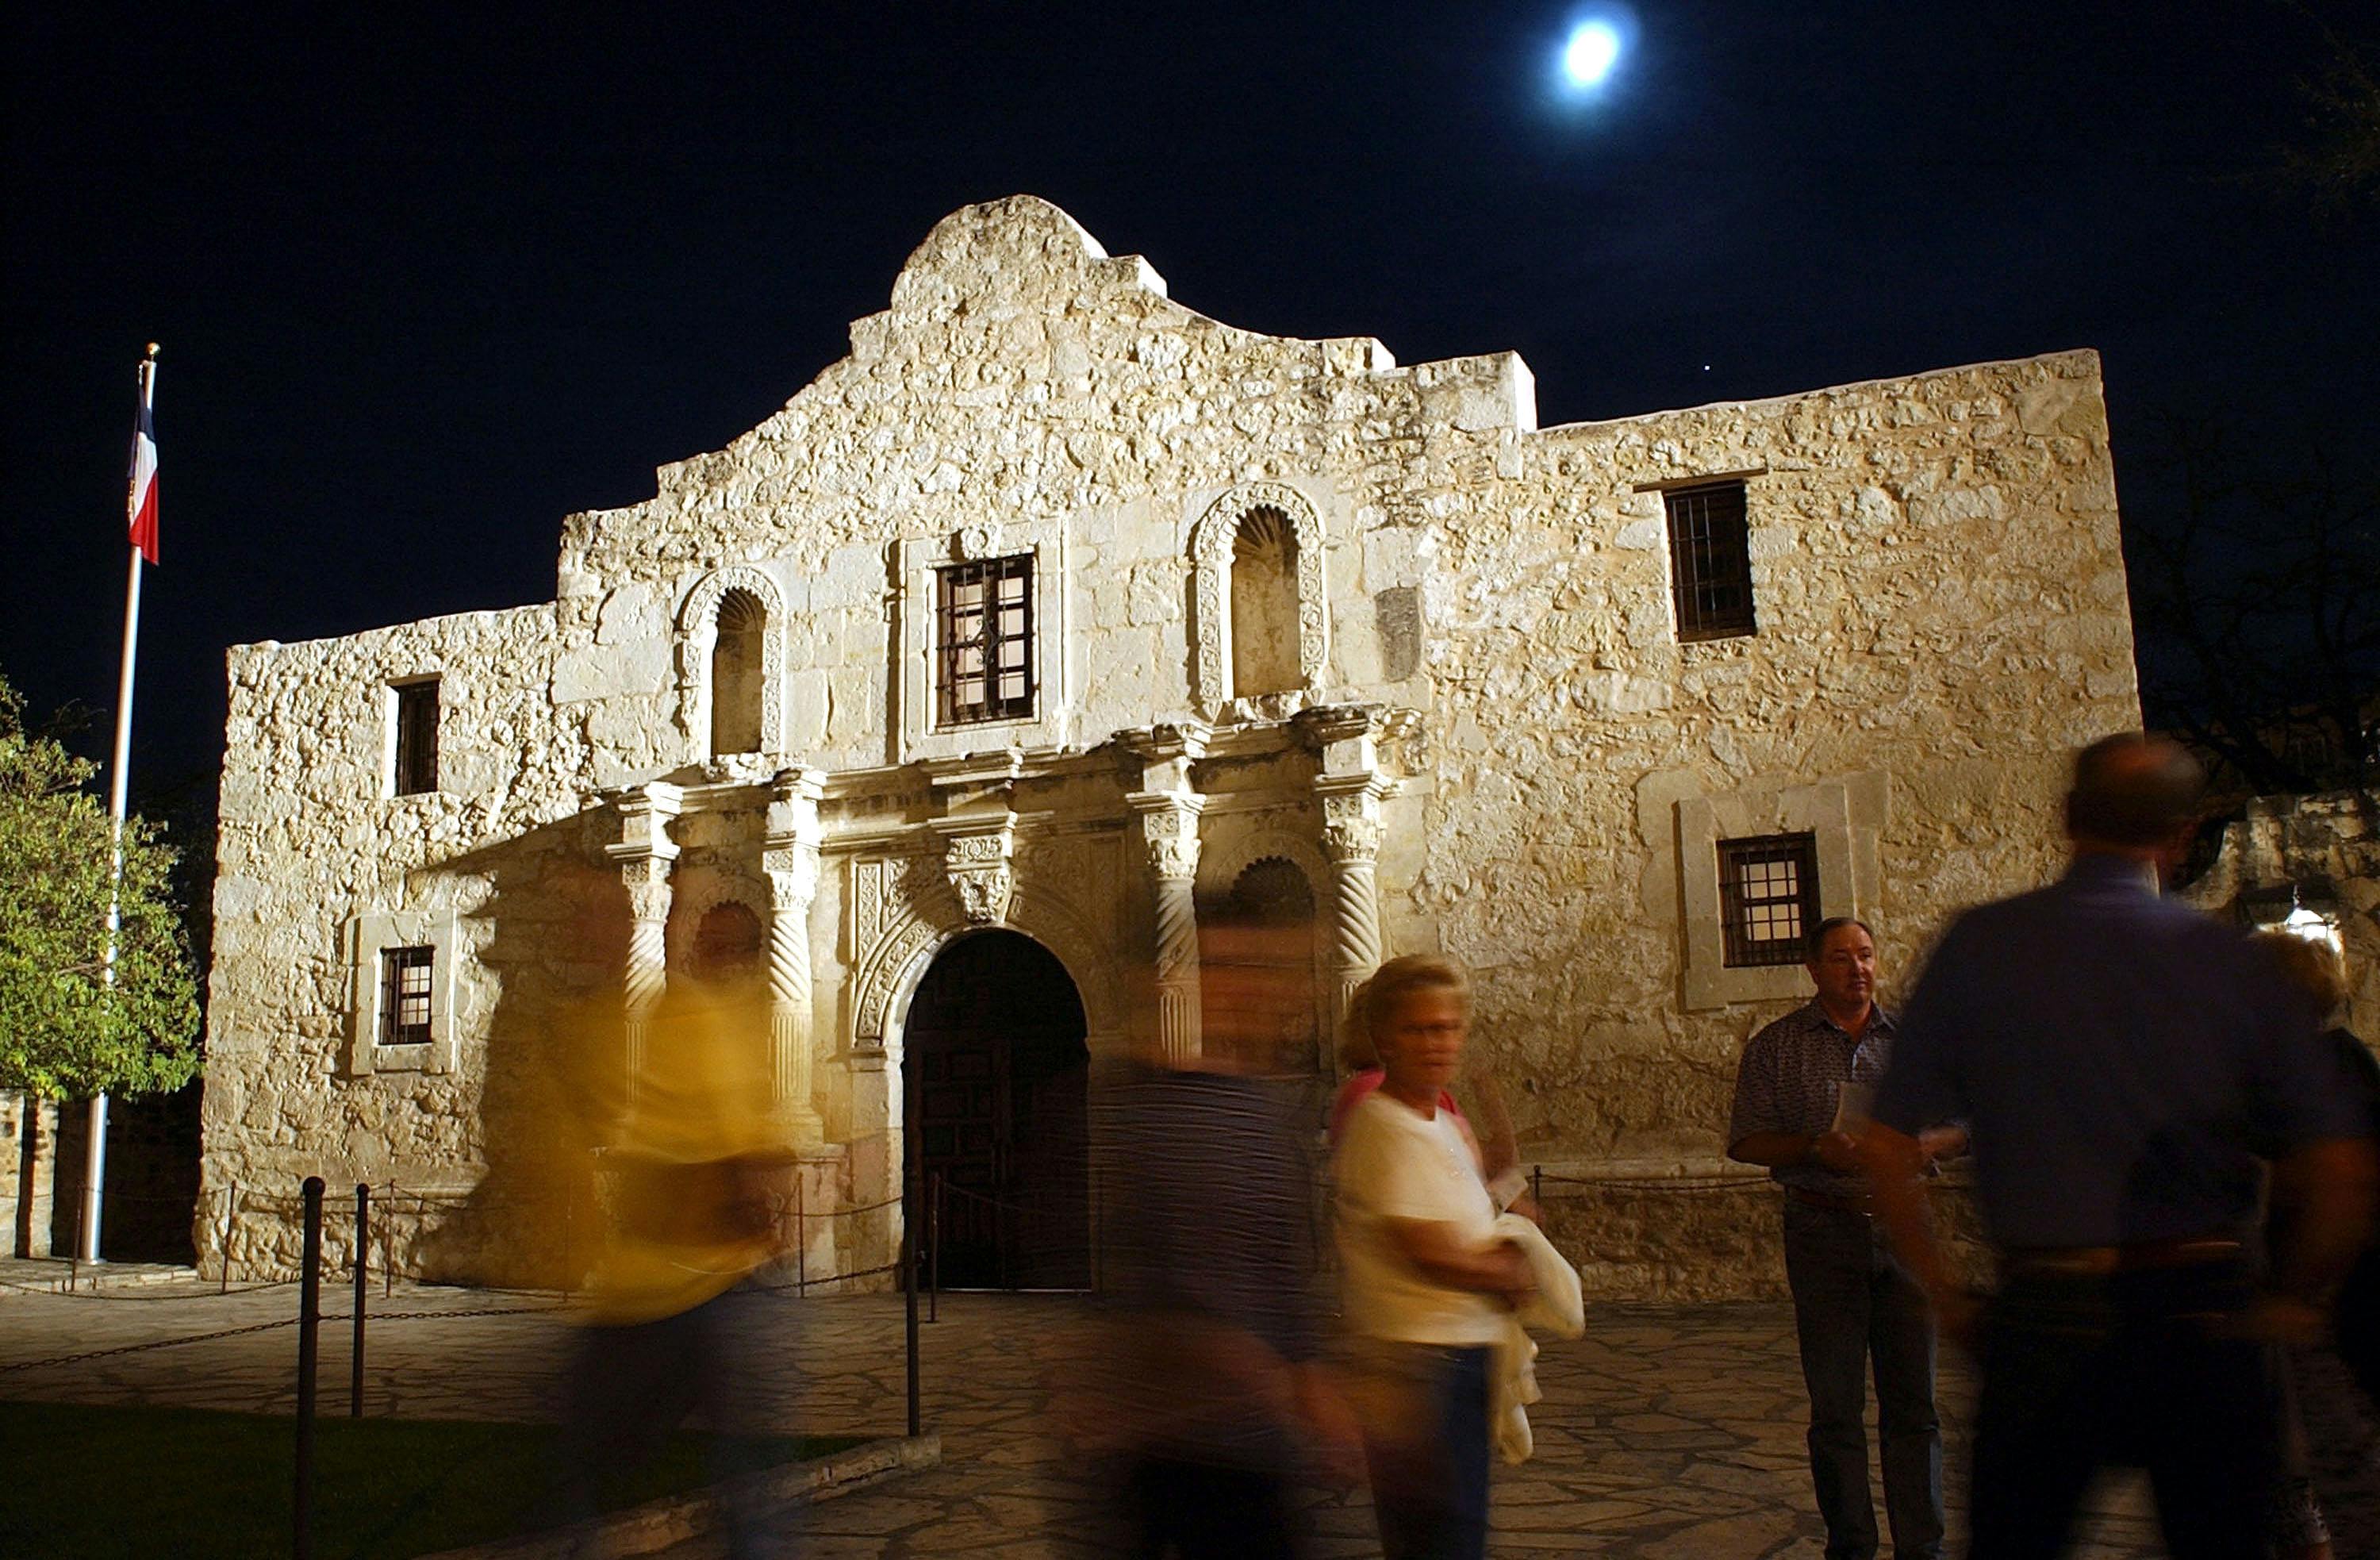 Visitors walk around outside of the Alamo the night before the 168th Anniversary of the 1836 Fall of the Alamo March 5, 2004 in San Antonio, Texas. 